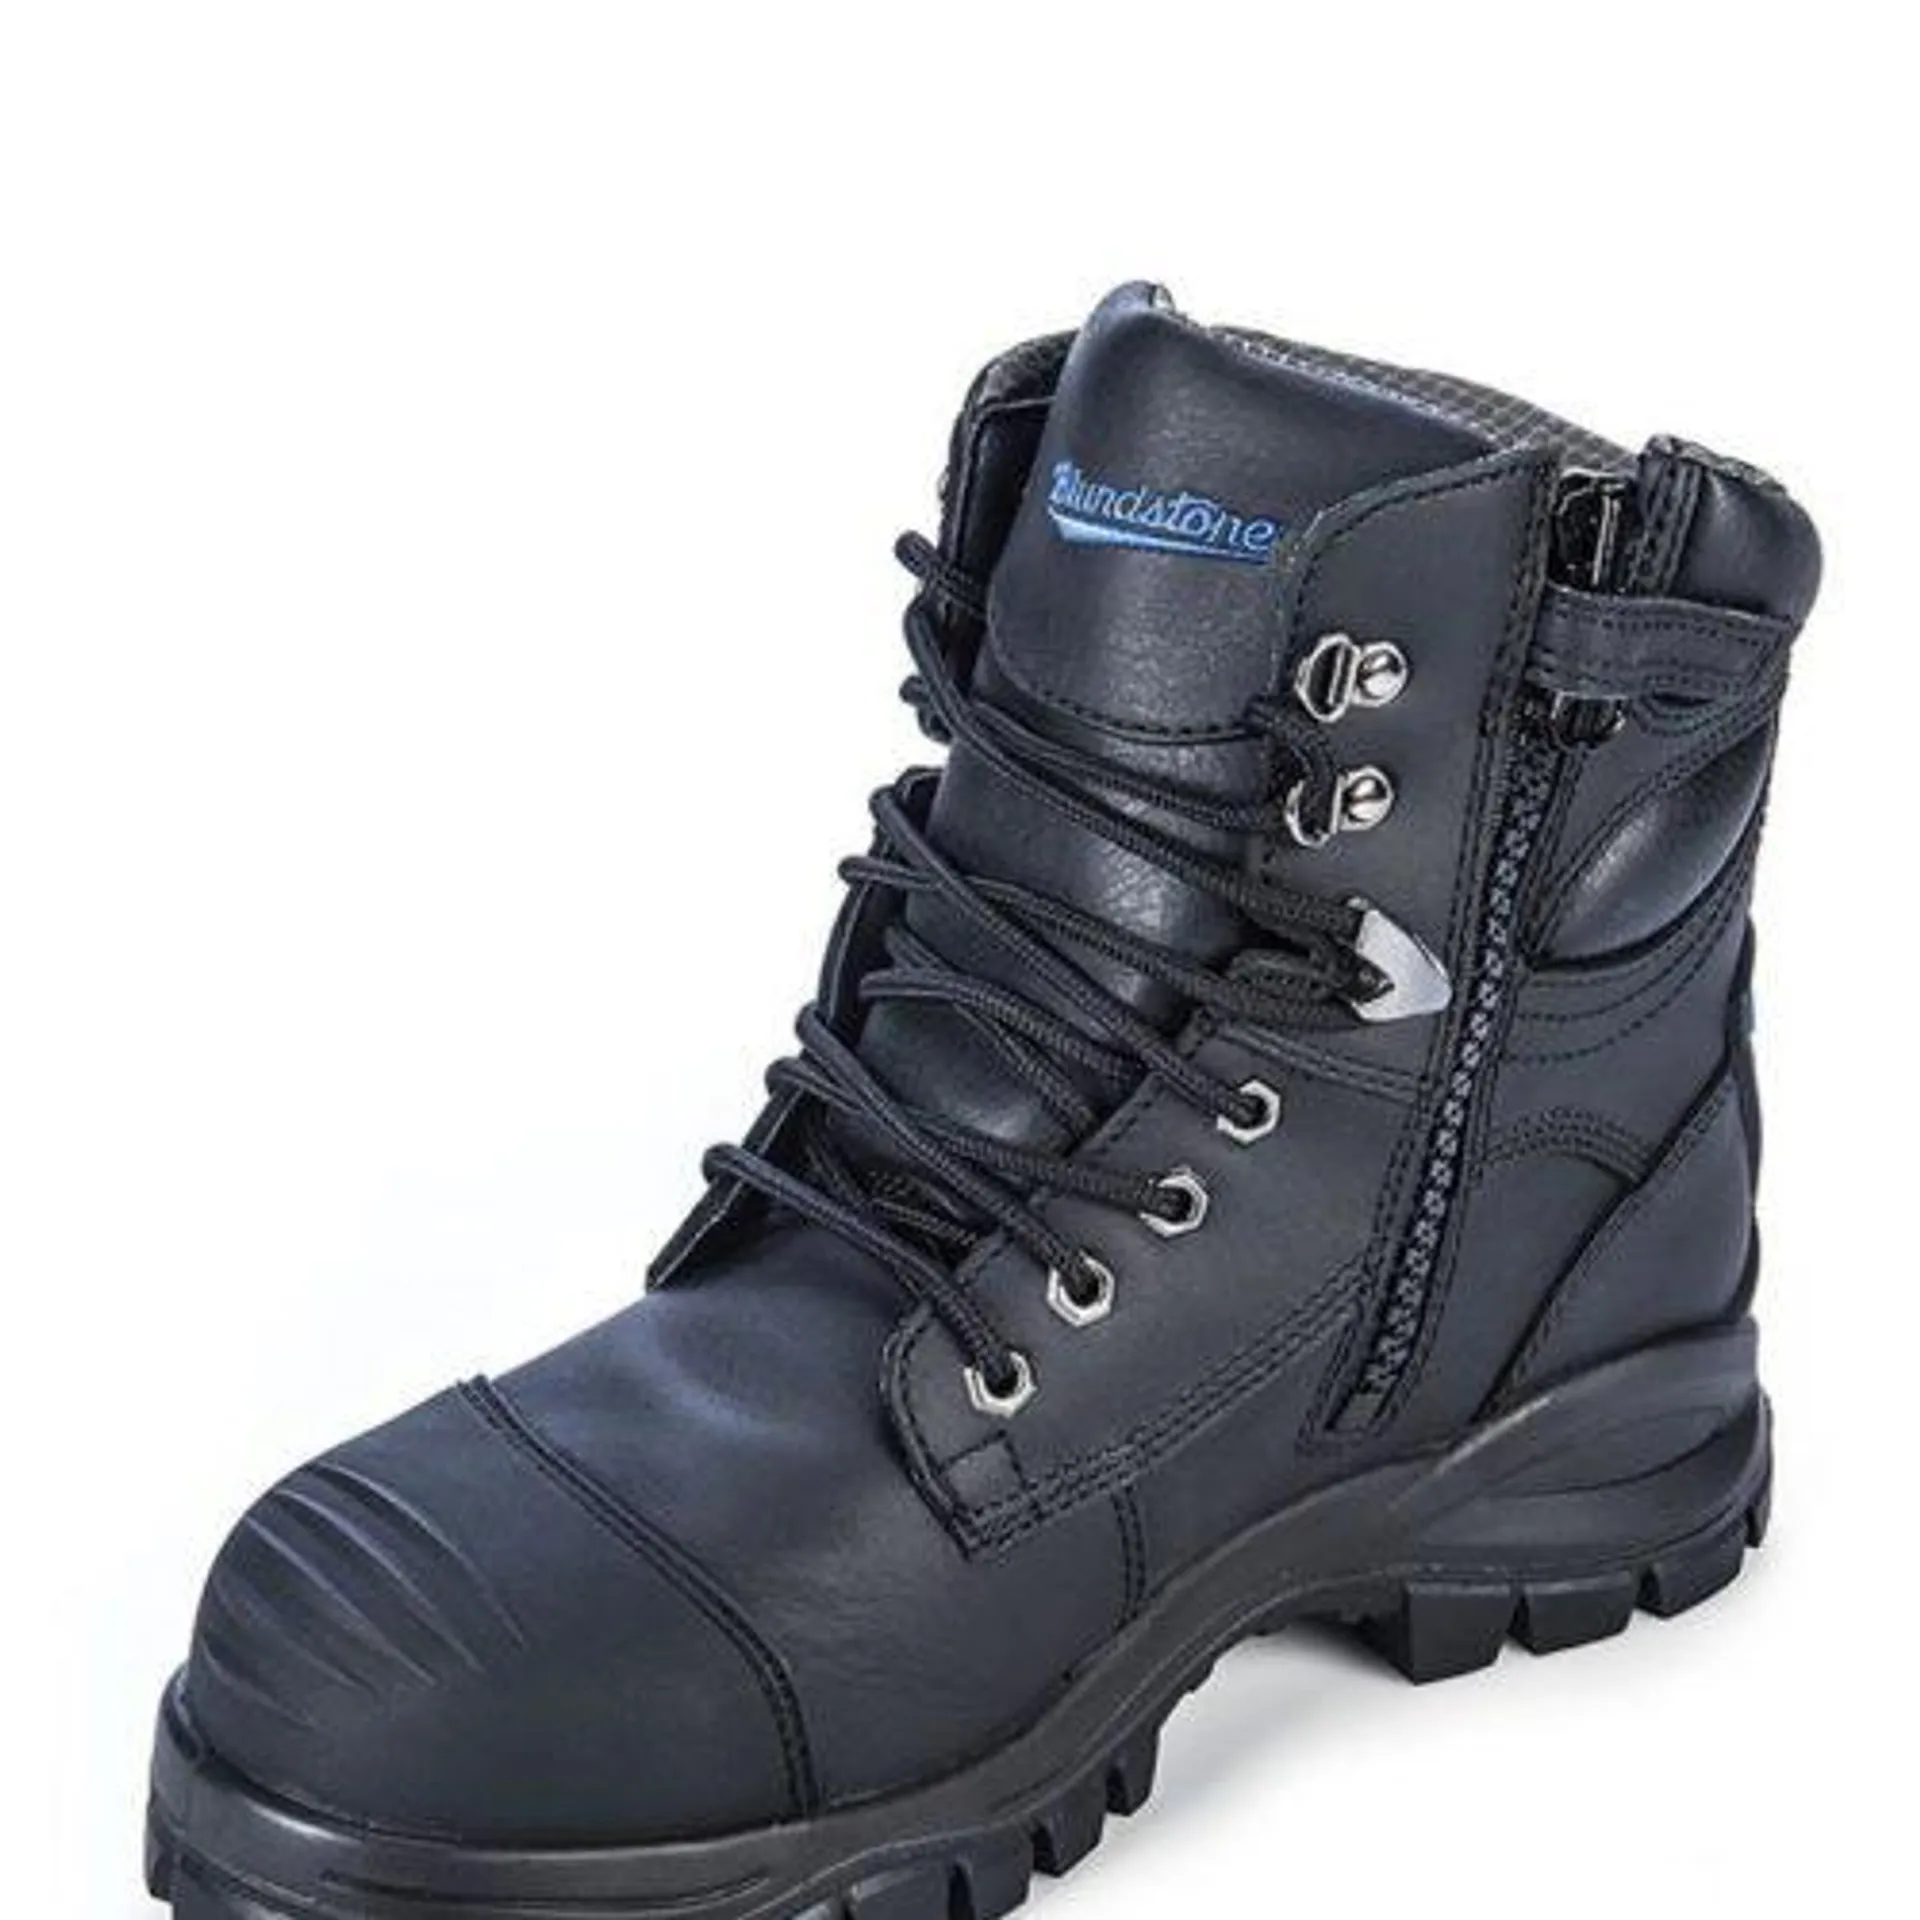 Blundstone Style 997 Lace Up Zip Side Boot